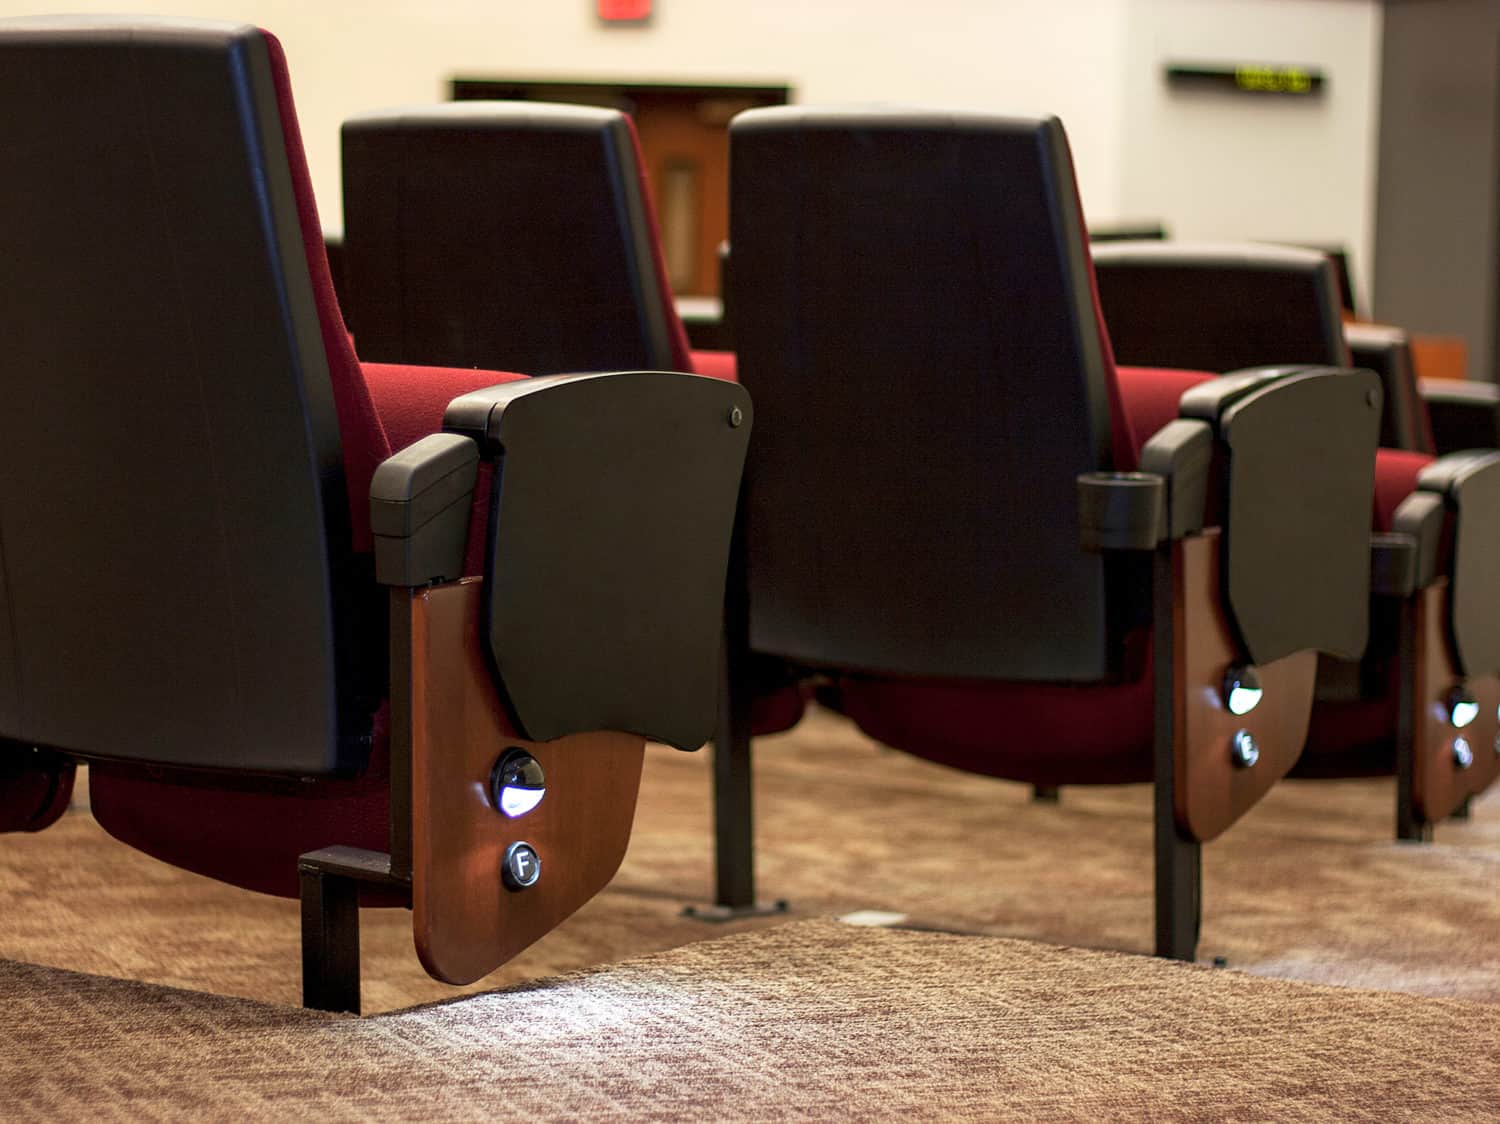 Clarity Auditorium Seating installed in a lecture hall, showing aisle light and row identification